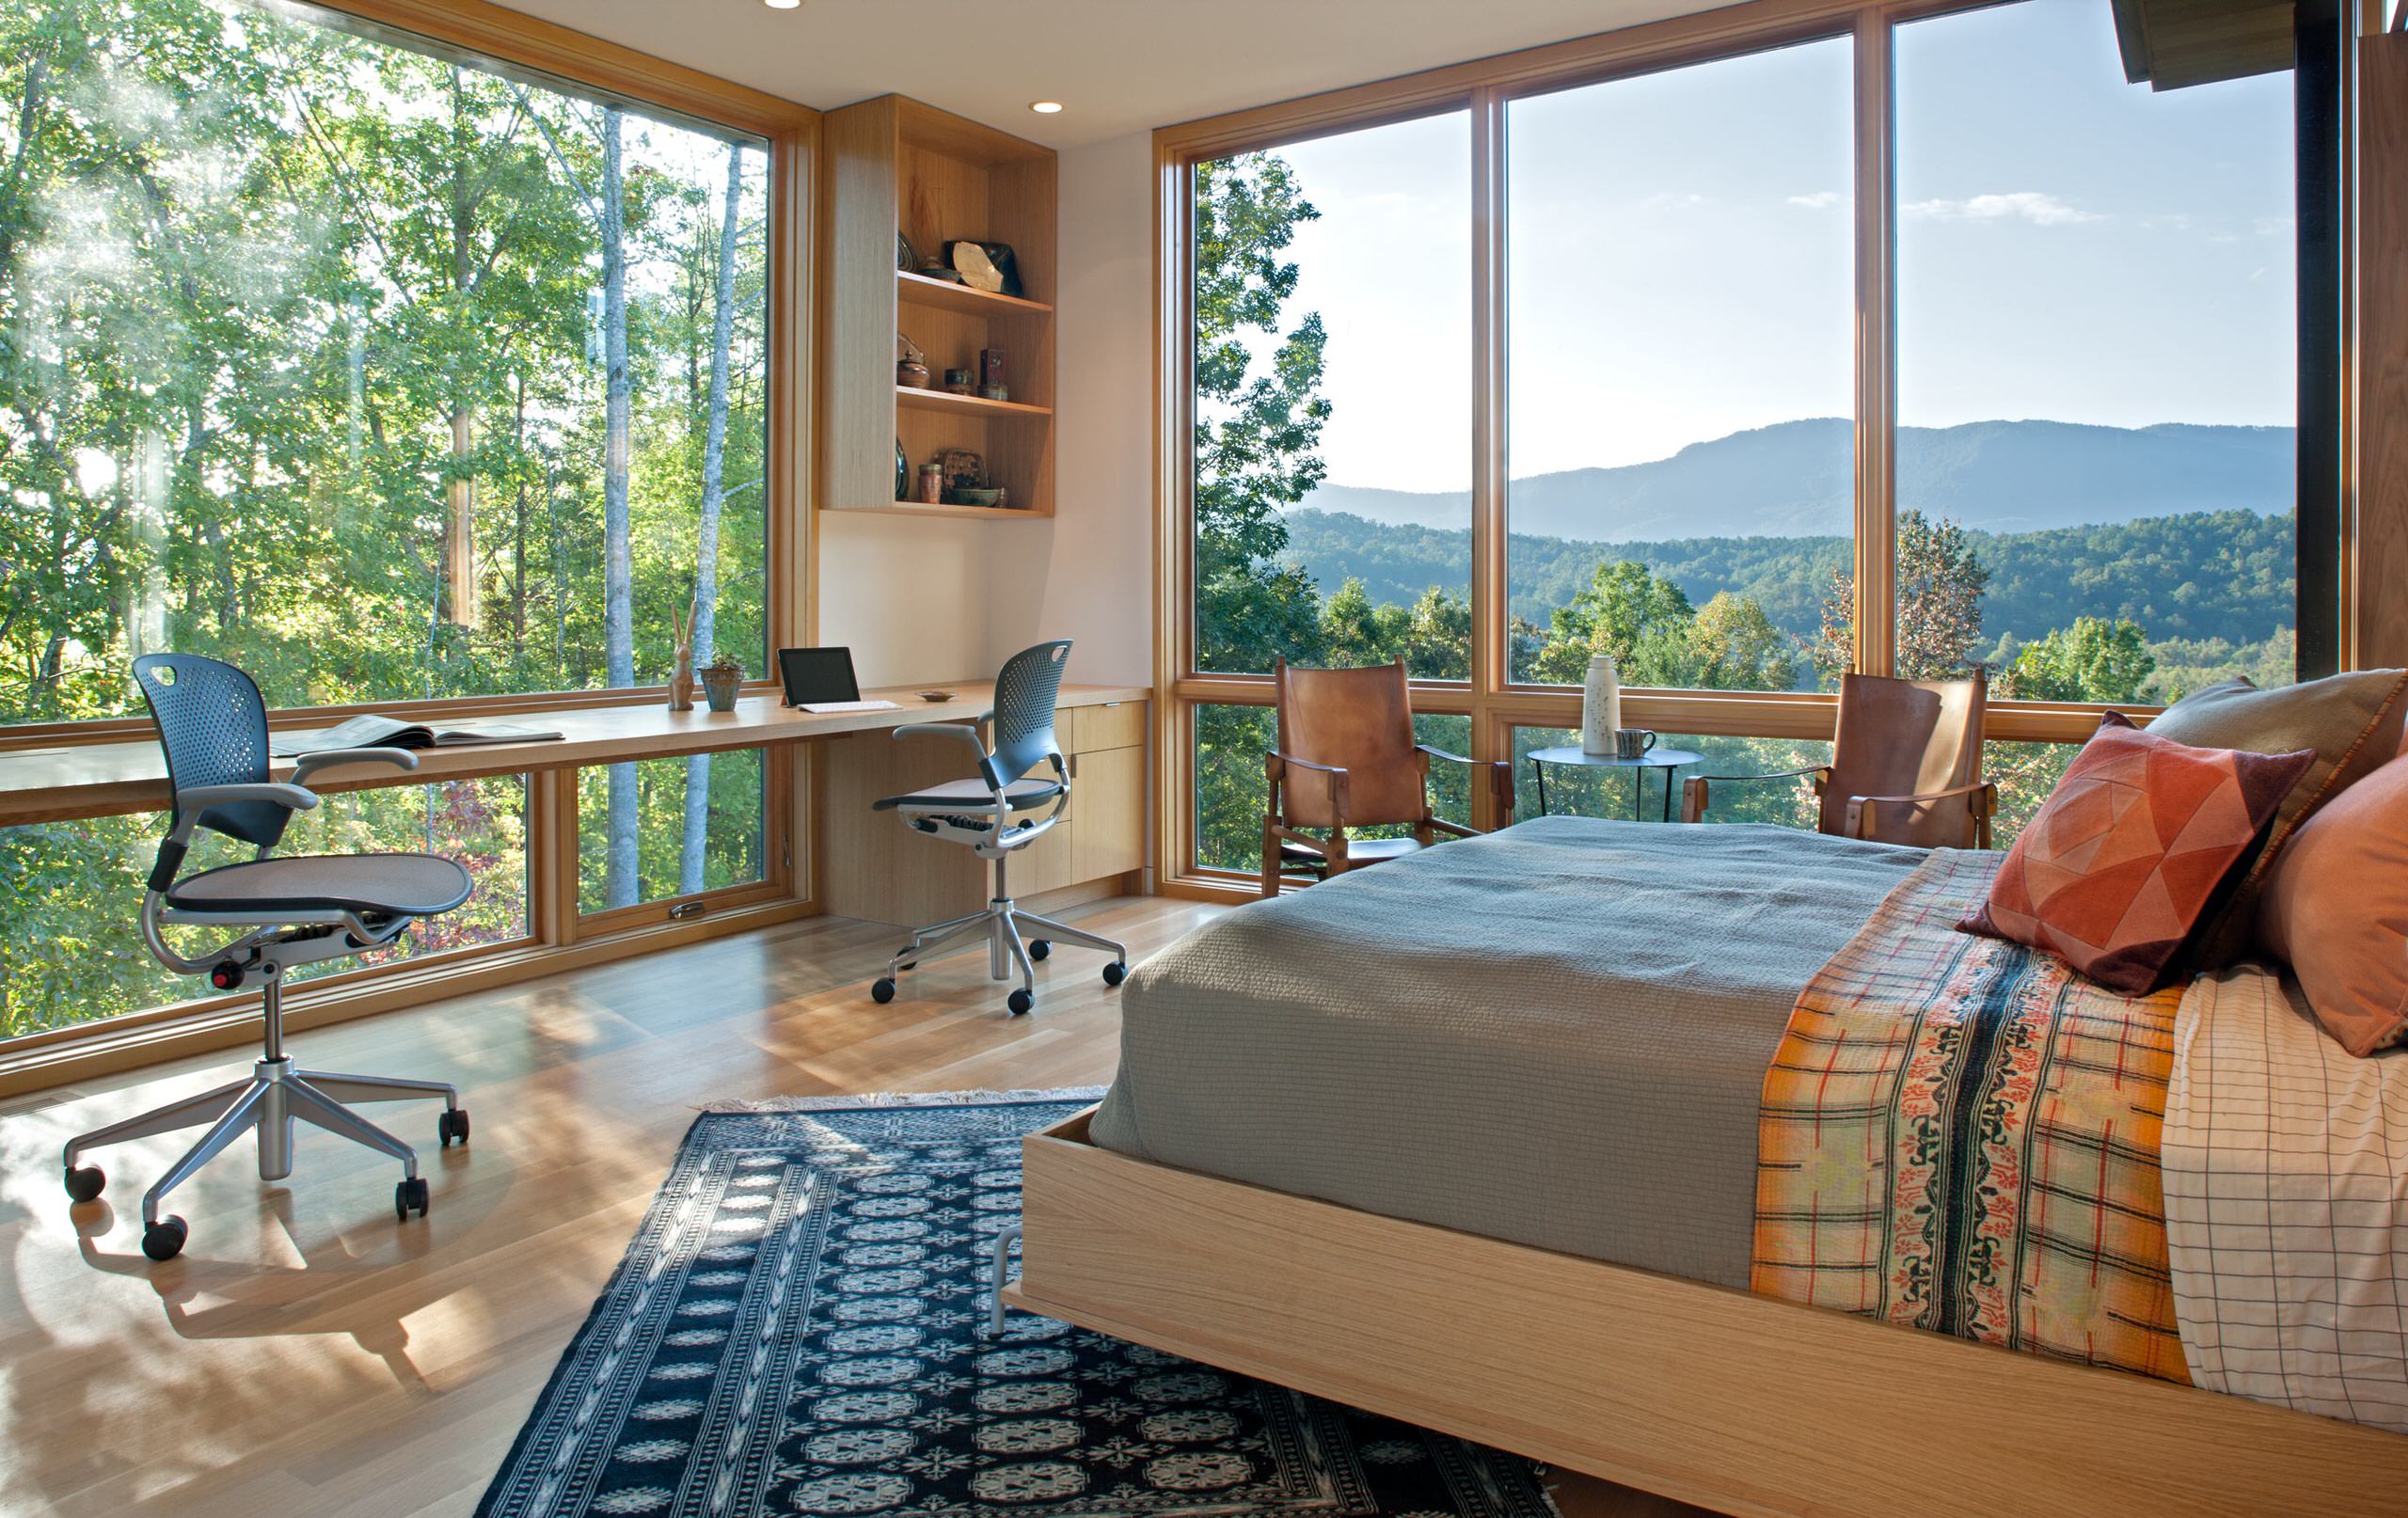 75 Beautiful Modern Bedroom Pictures Ideas August 2021 Houzz